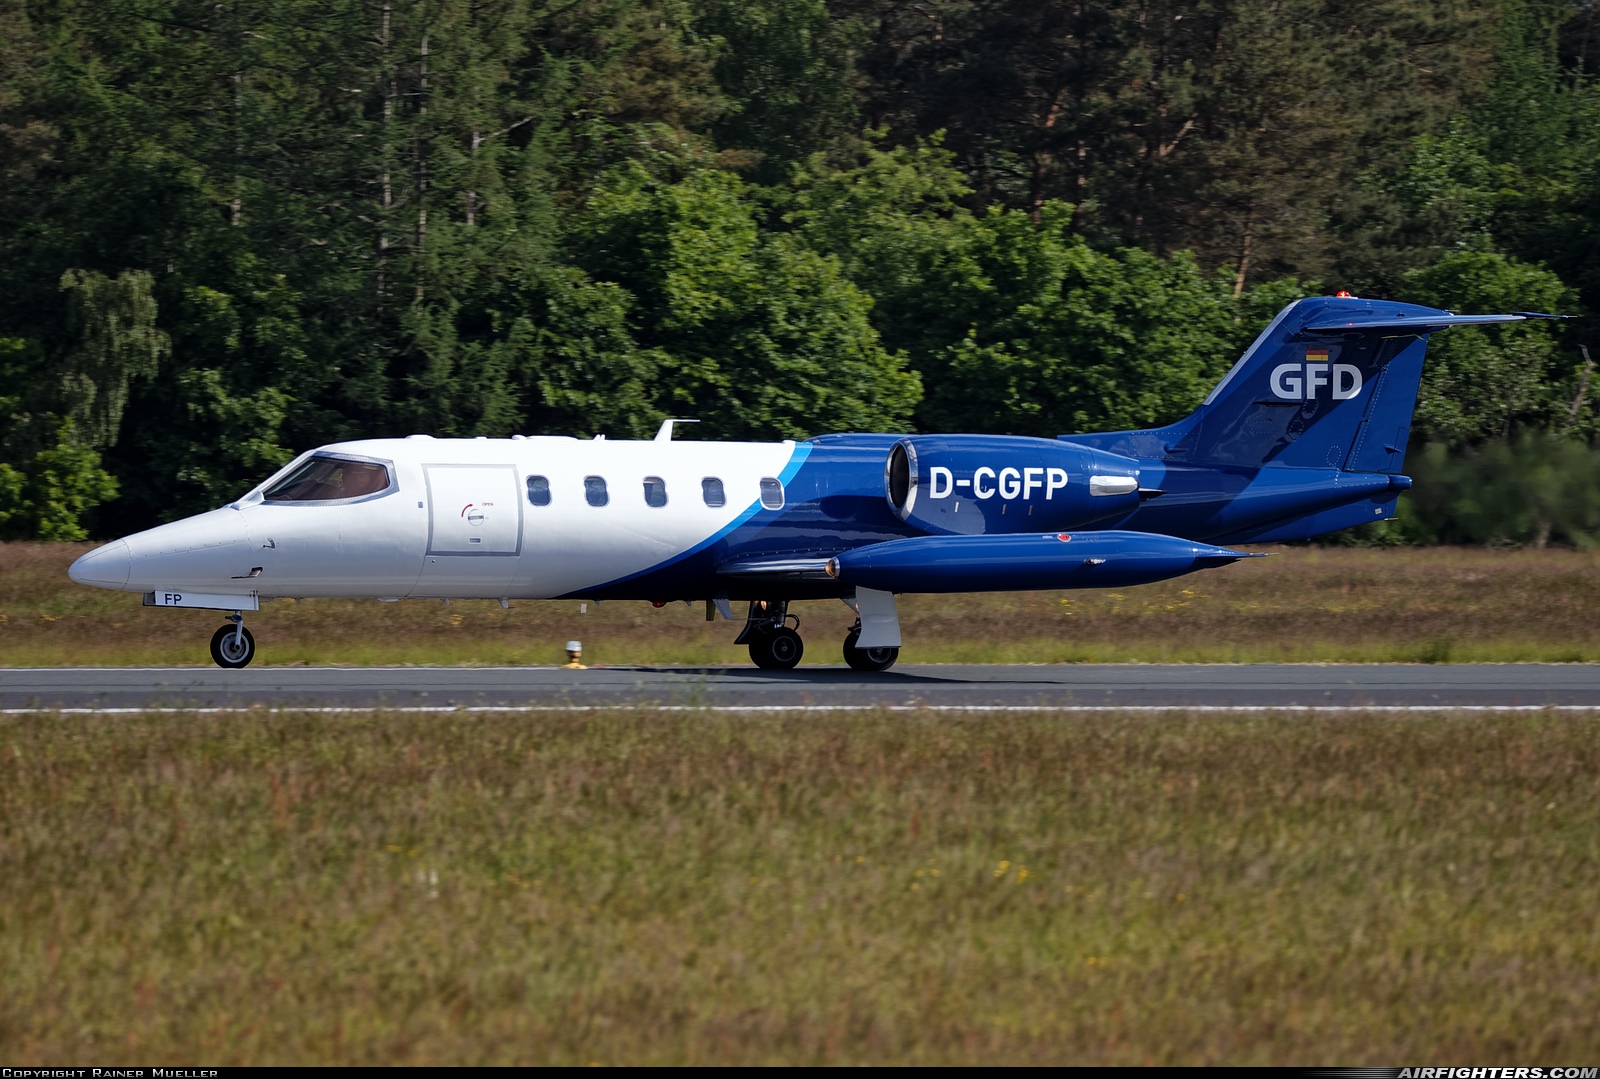 Company Owned - GFD Learjet 35A D-CGFP at Wittmundhafen (Wittmund) (ETNT), Germany